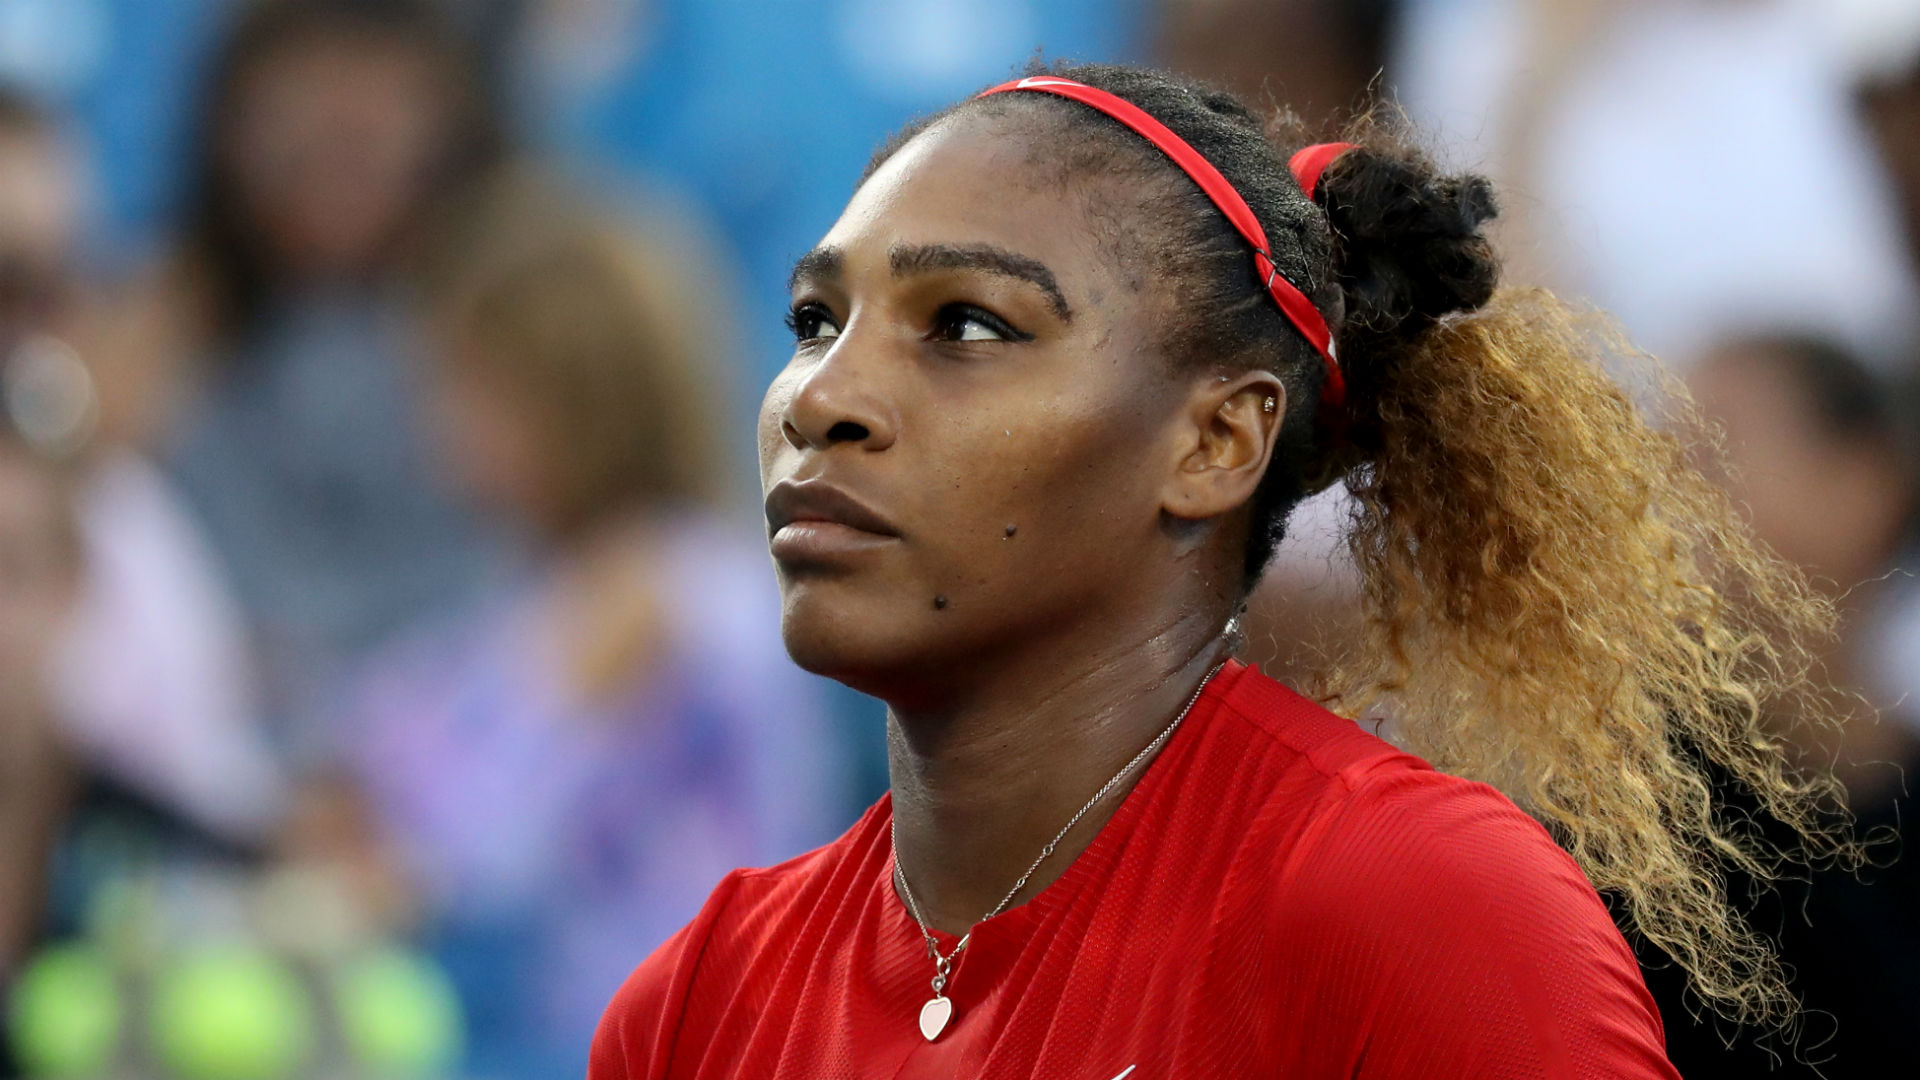 A second-round clash between the Williams sisters will not take place in Rome after Serena suffered another injury setback.